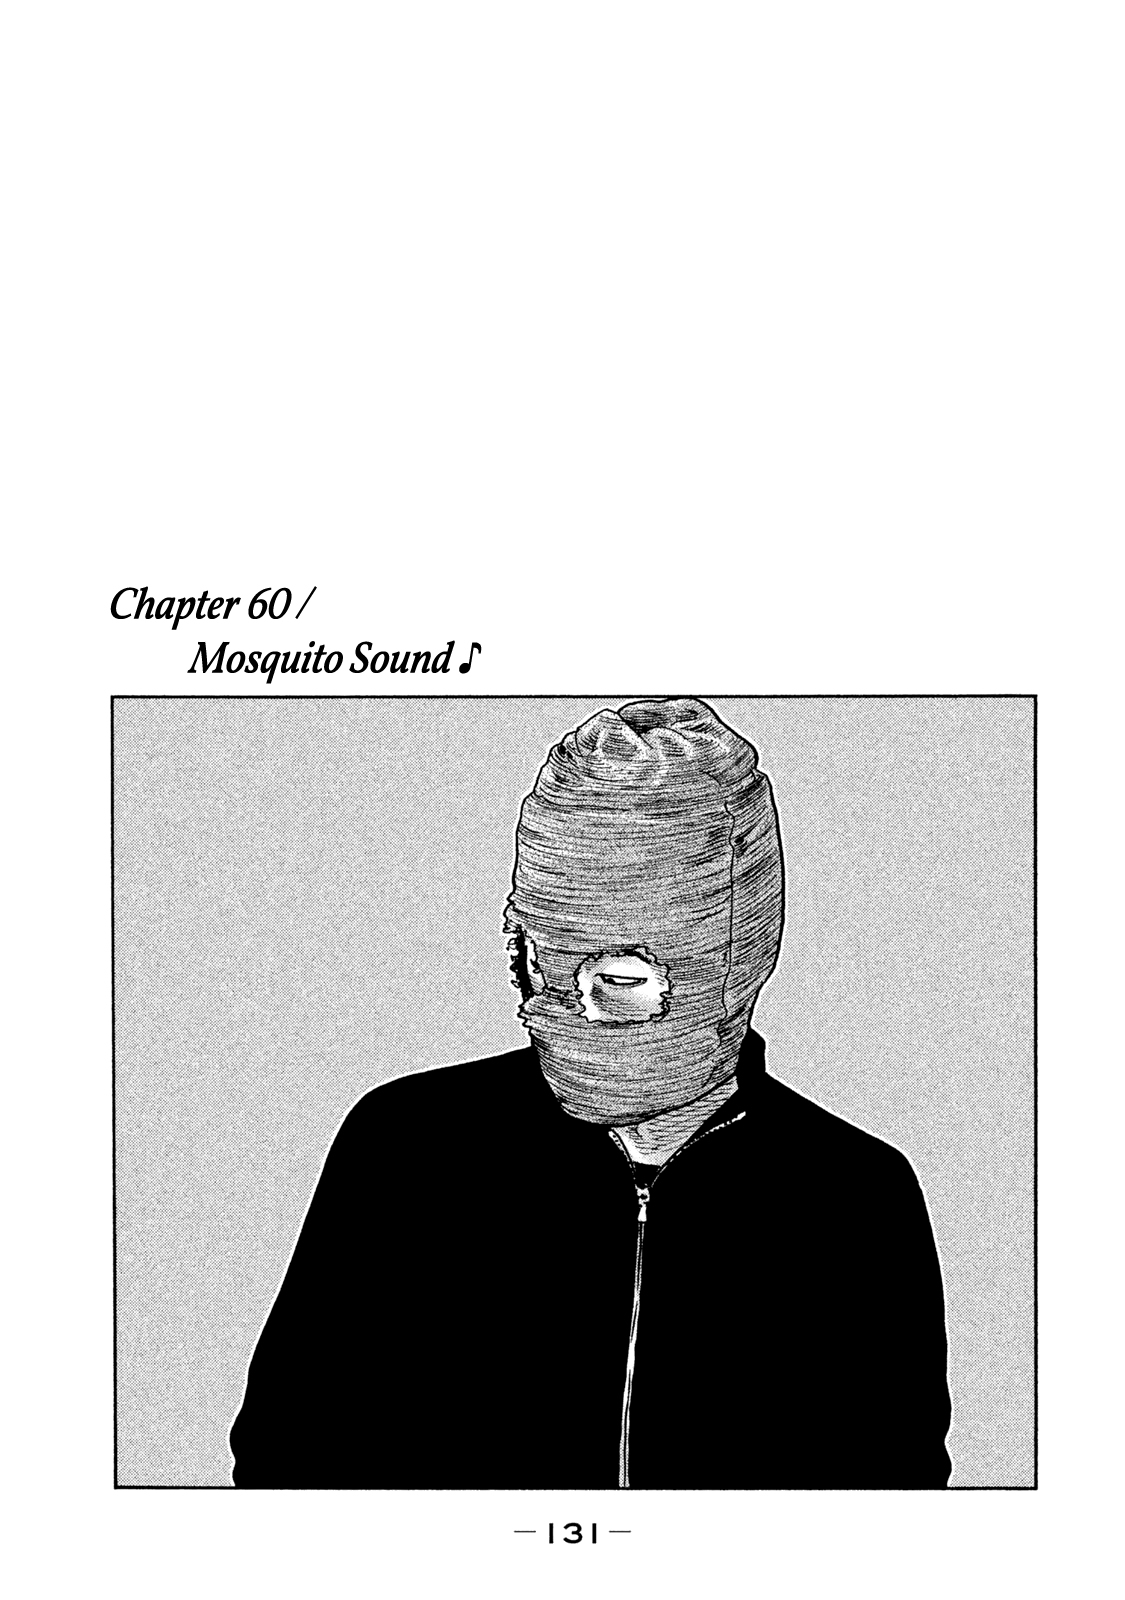 The Fable Vol. 6 Ch. 60 Mosquito Sound